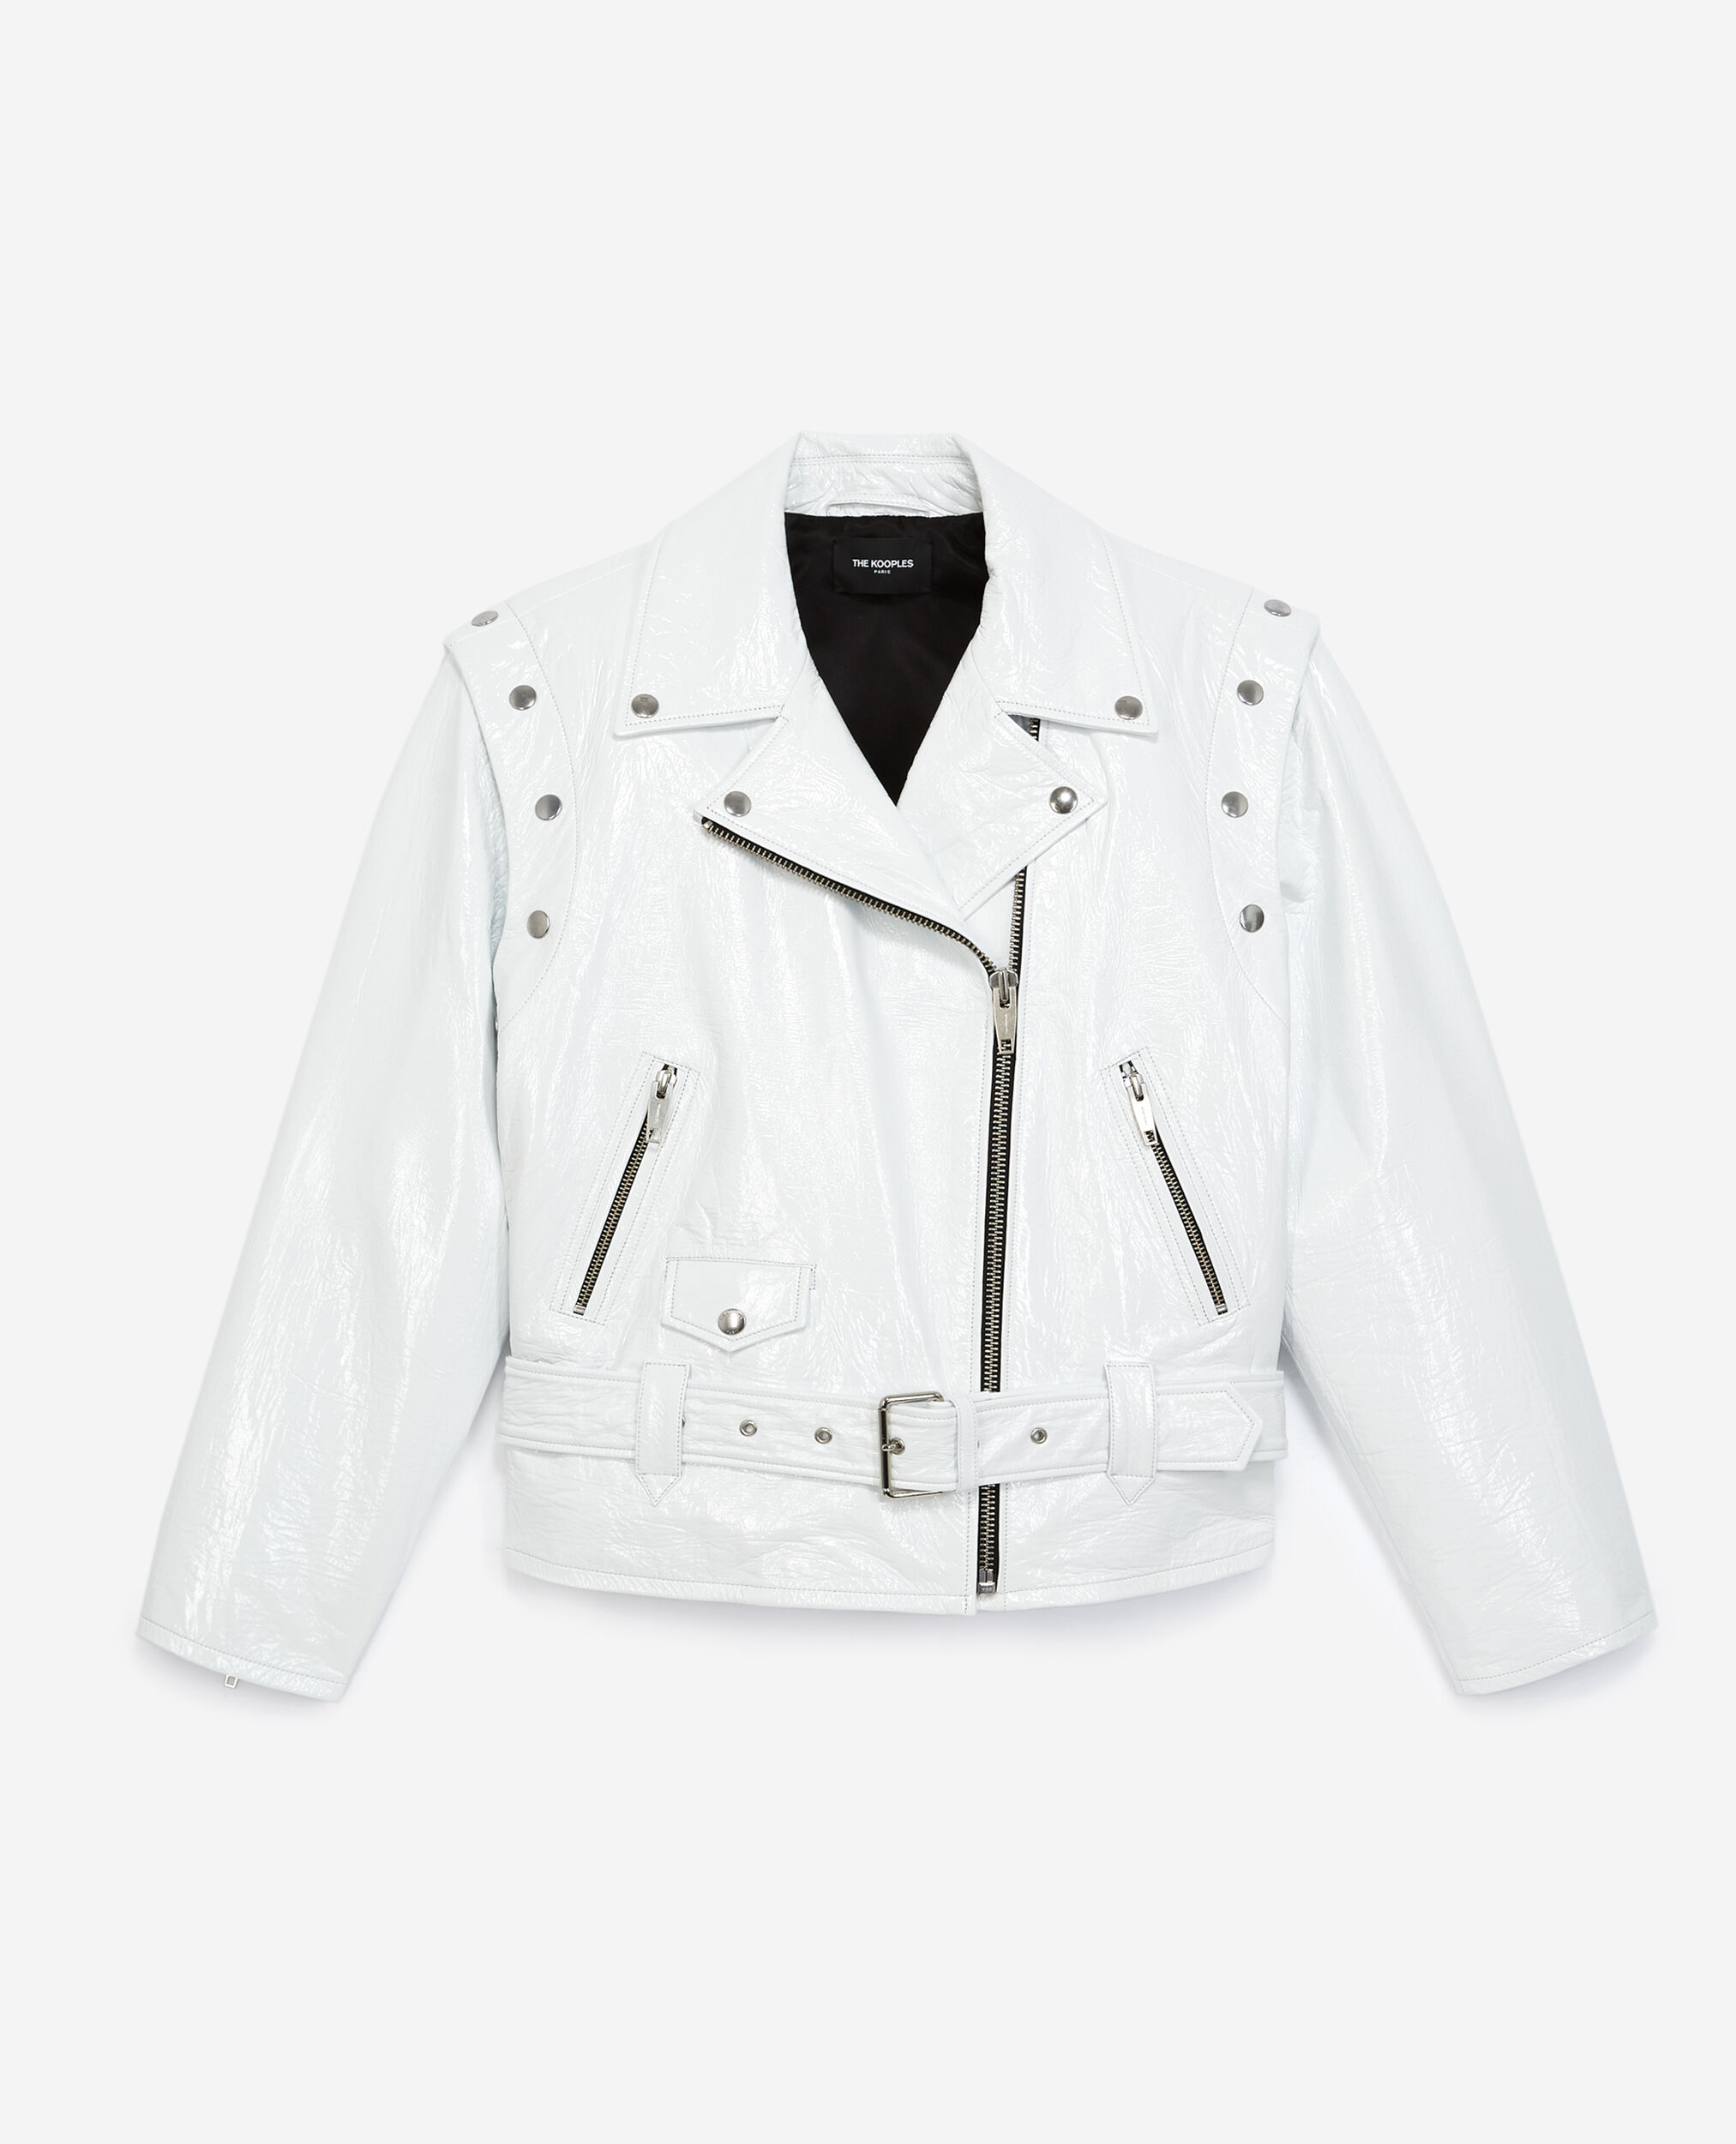 Blouson cuir blanc à manches amovibles, WHITE, hi-res image number null